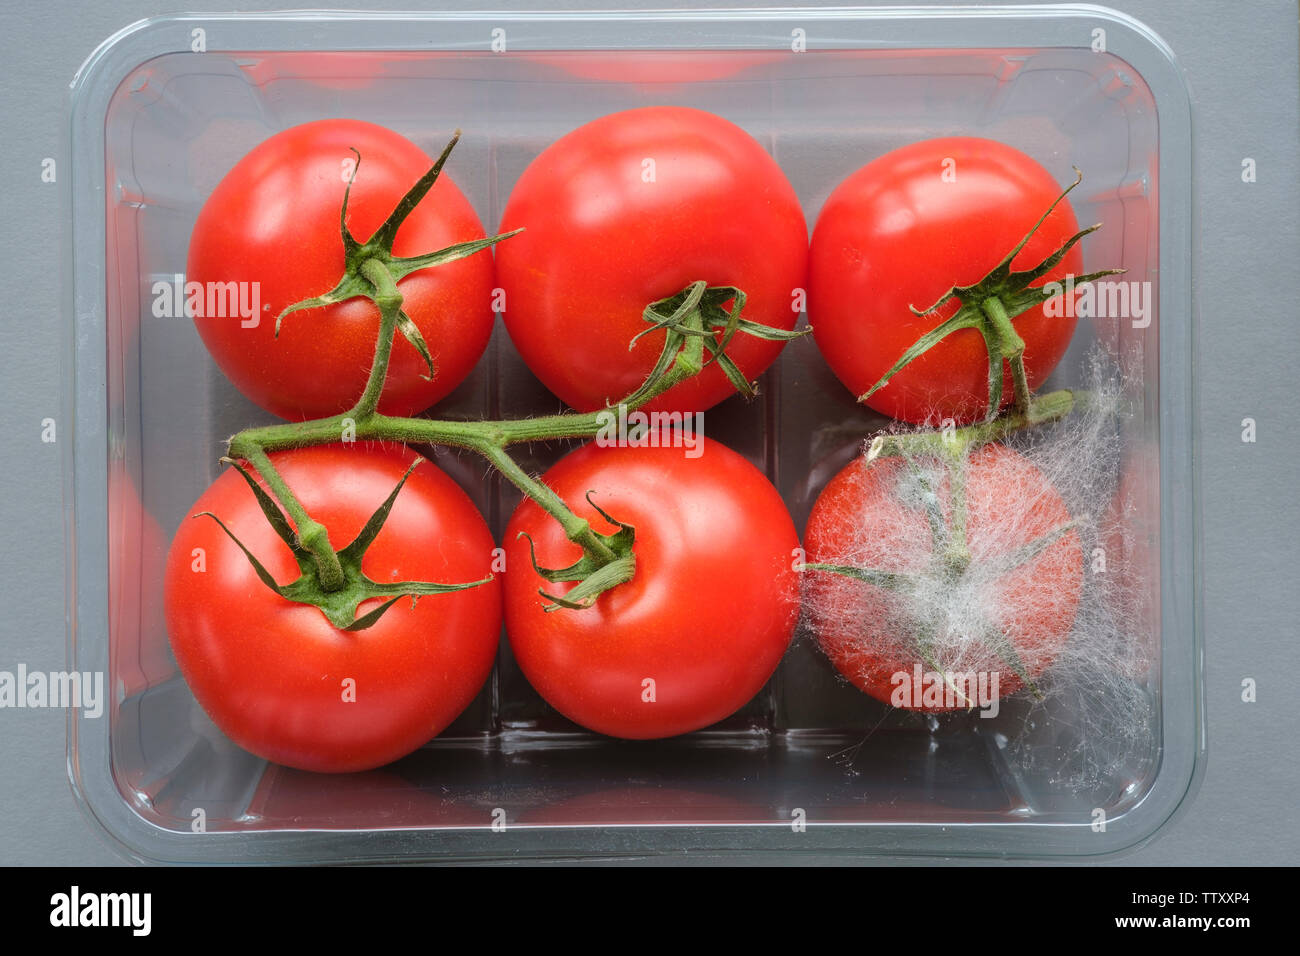 Download Tomatoes In A Plastic Tray From A Supermarket With One Growing Fungus Which Would Infect The Others If Not Separated Stock Photo Alamy Yellowimages Mockups